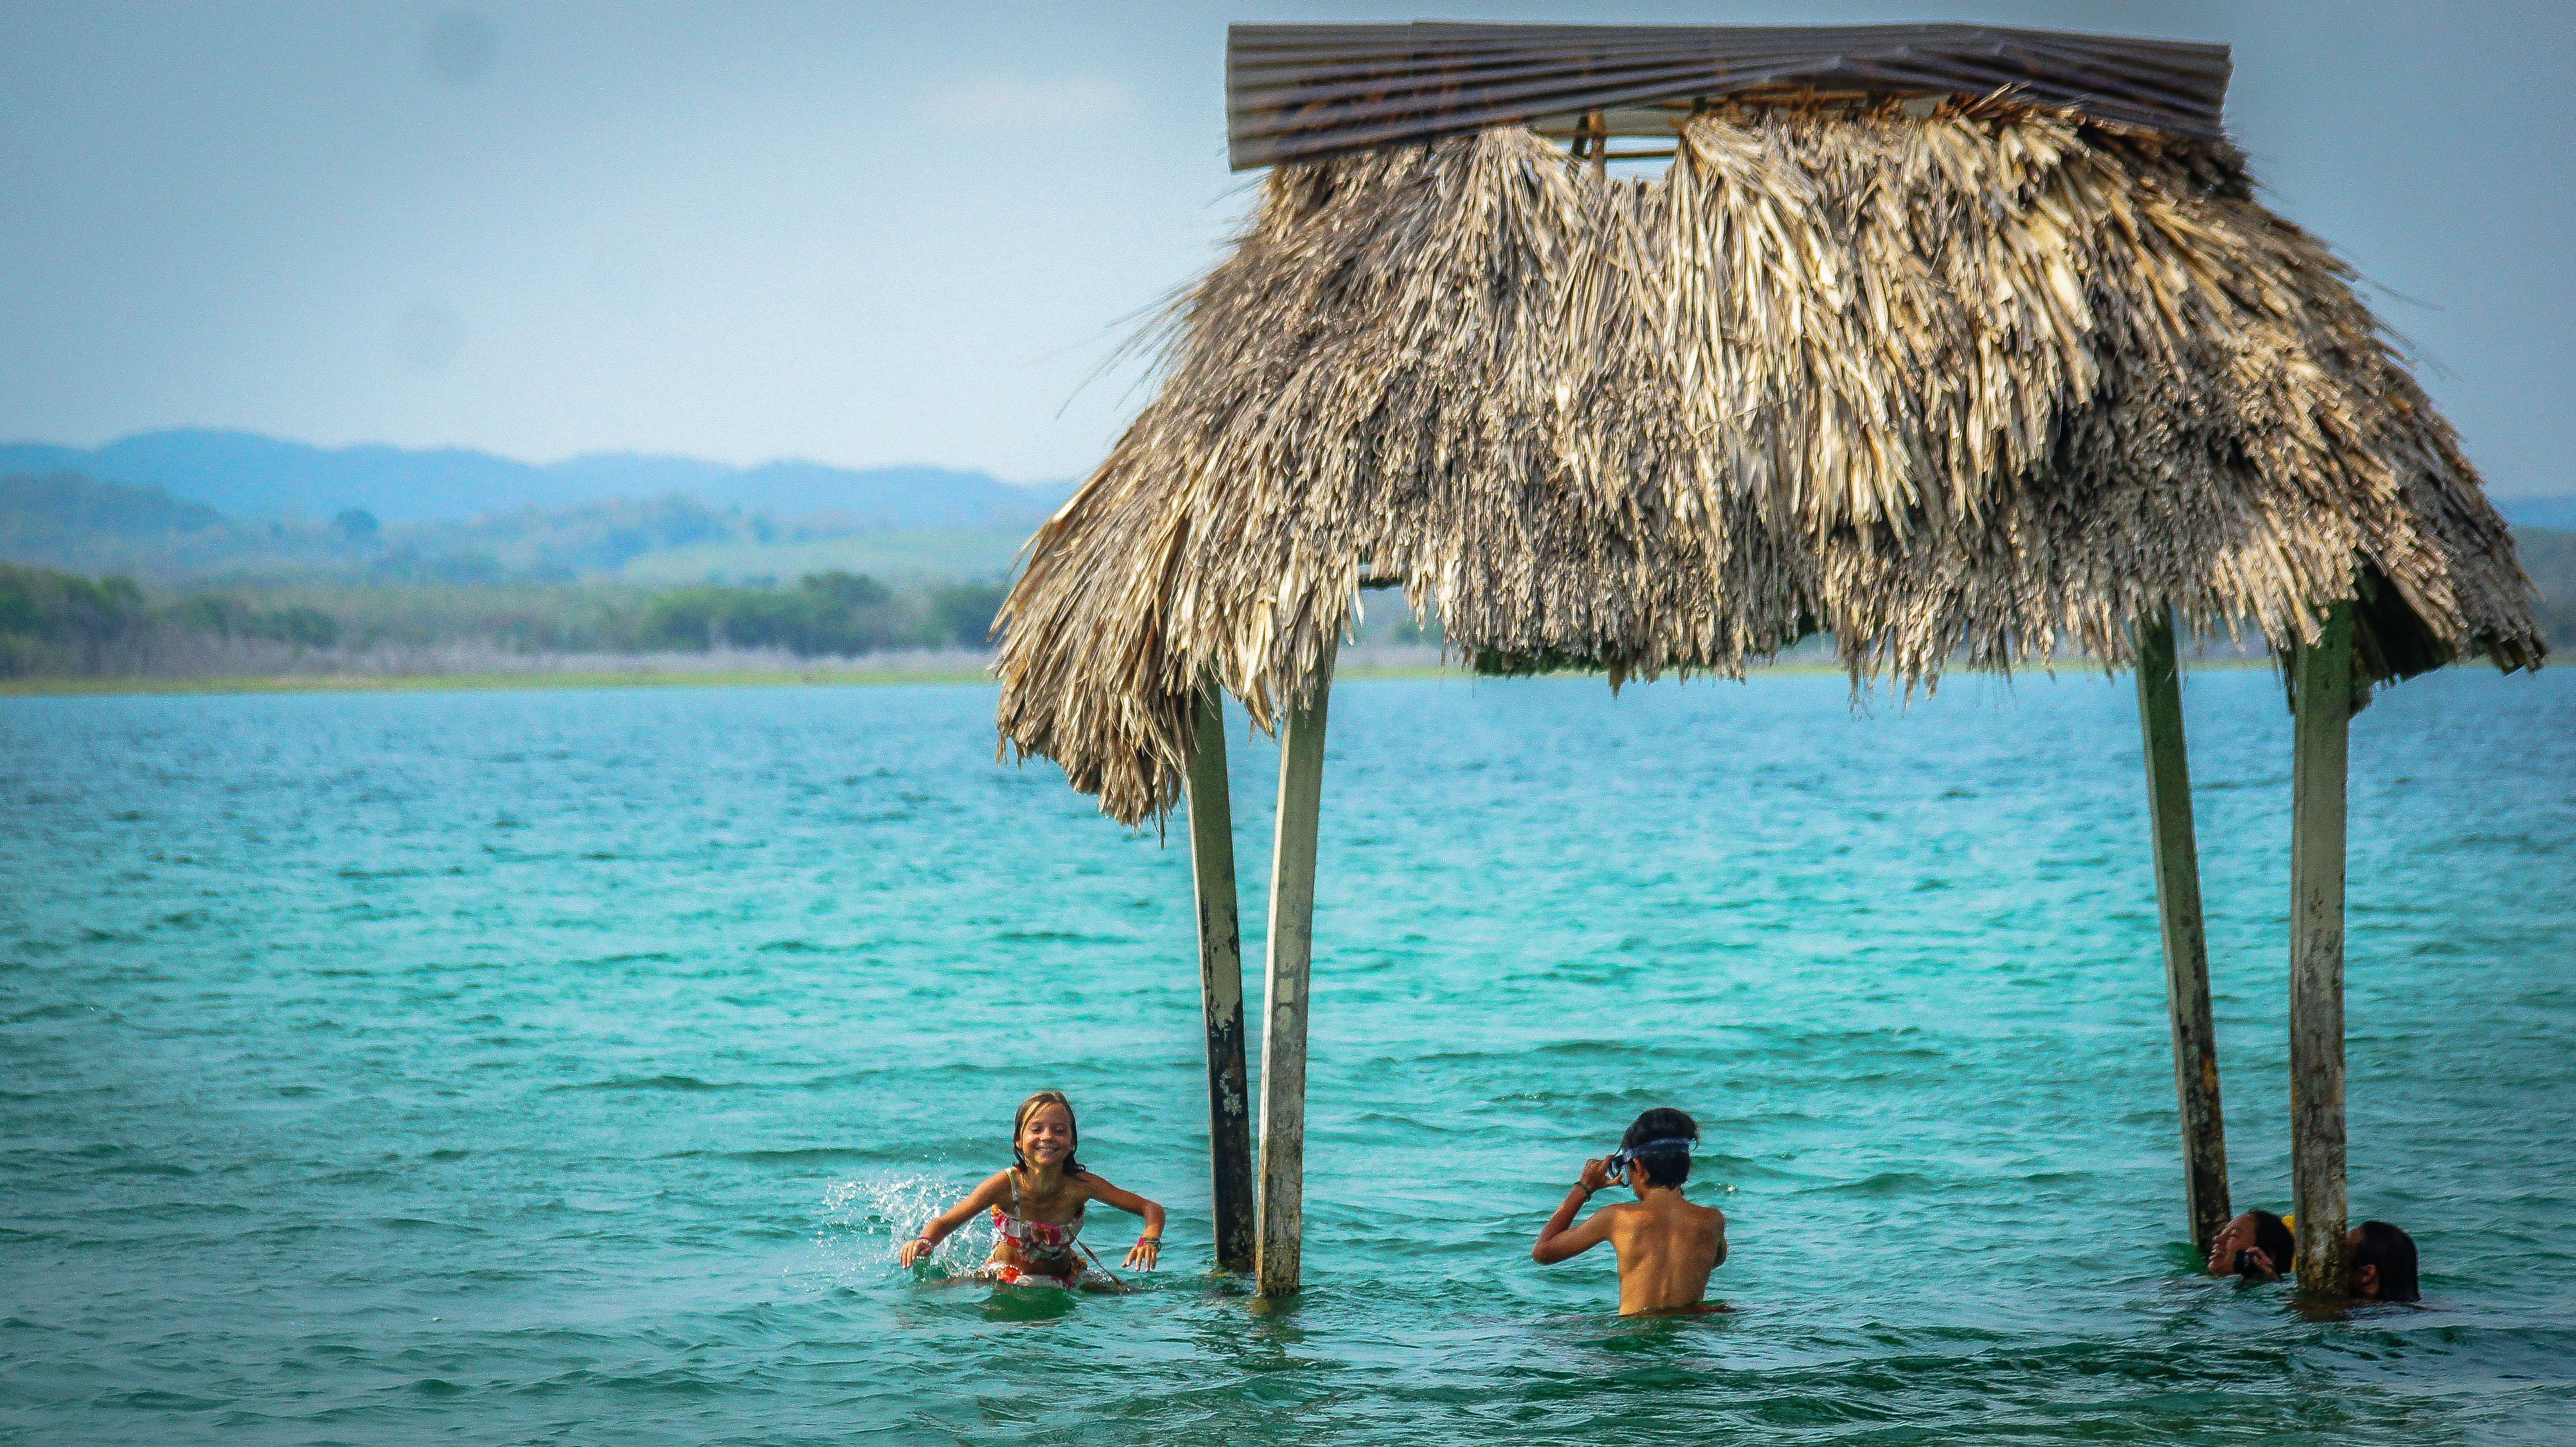 A young girl and boy playing in the water underneath a palapa in Guatemala, members of a traveling family that shares its wanderlust. (image © Sam Anaya A.).